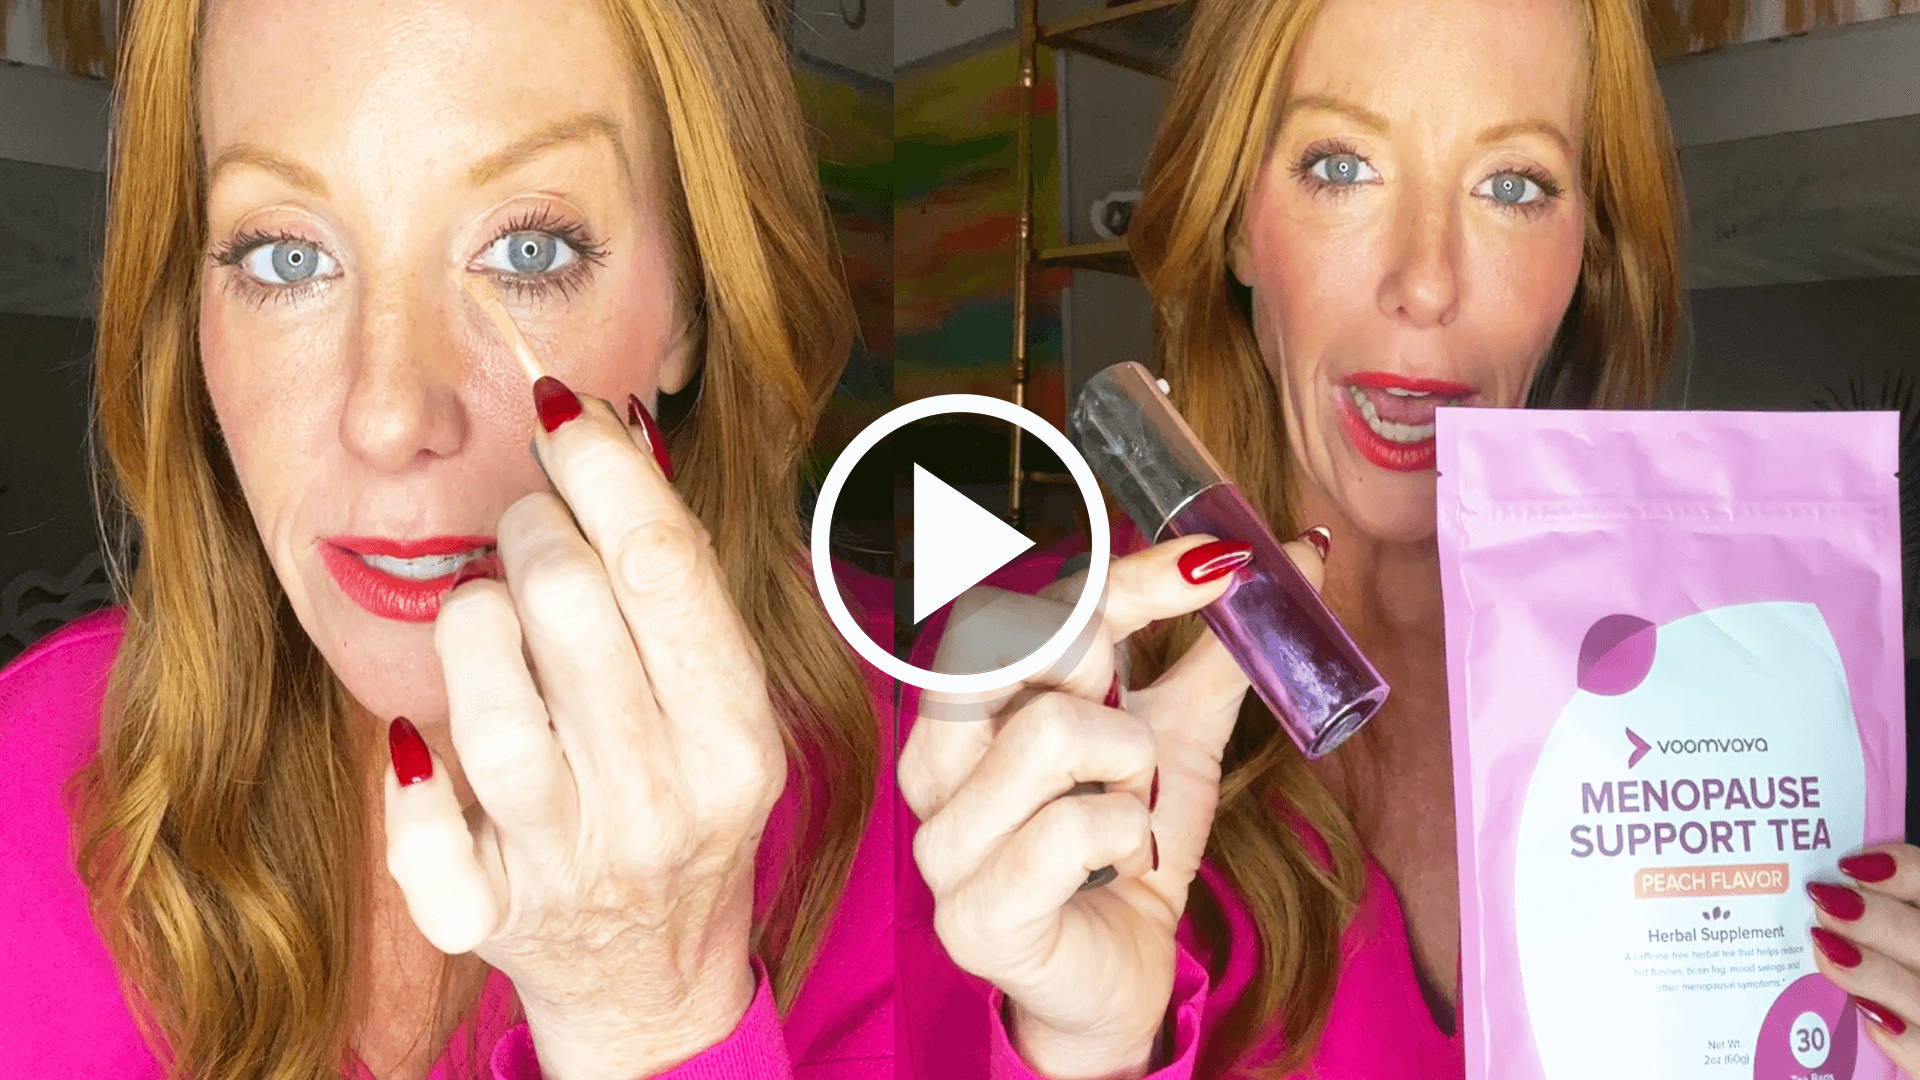 5 Makeup Tips For A Glowing Holiday Look For Women Over 40 Voomvaya 